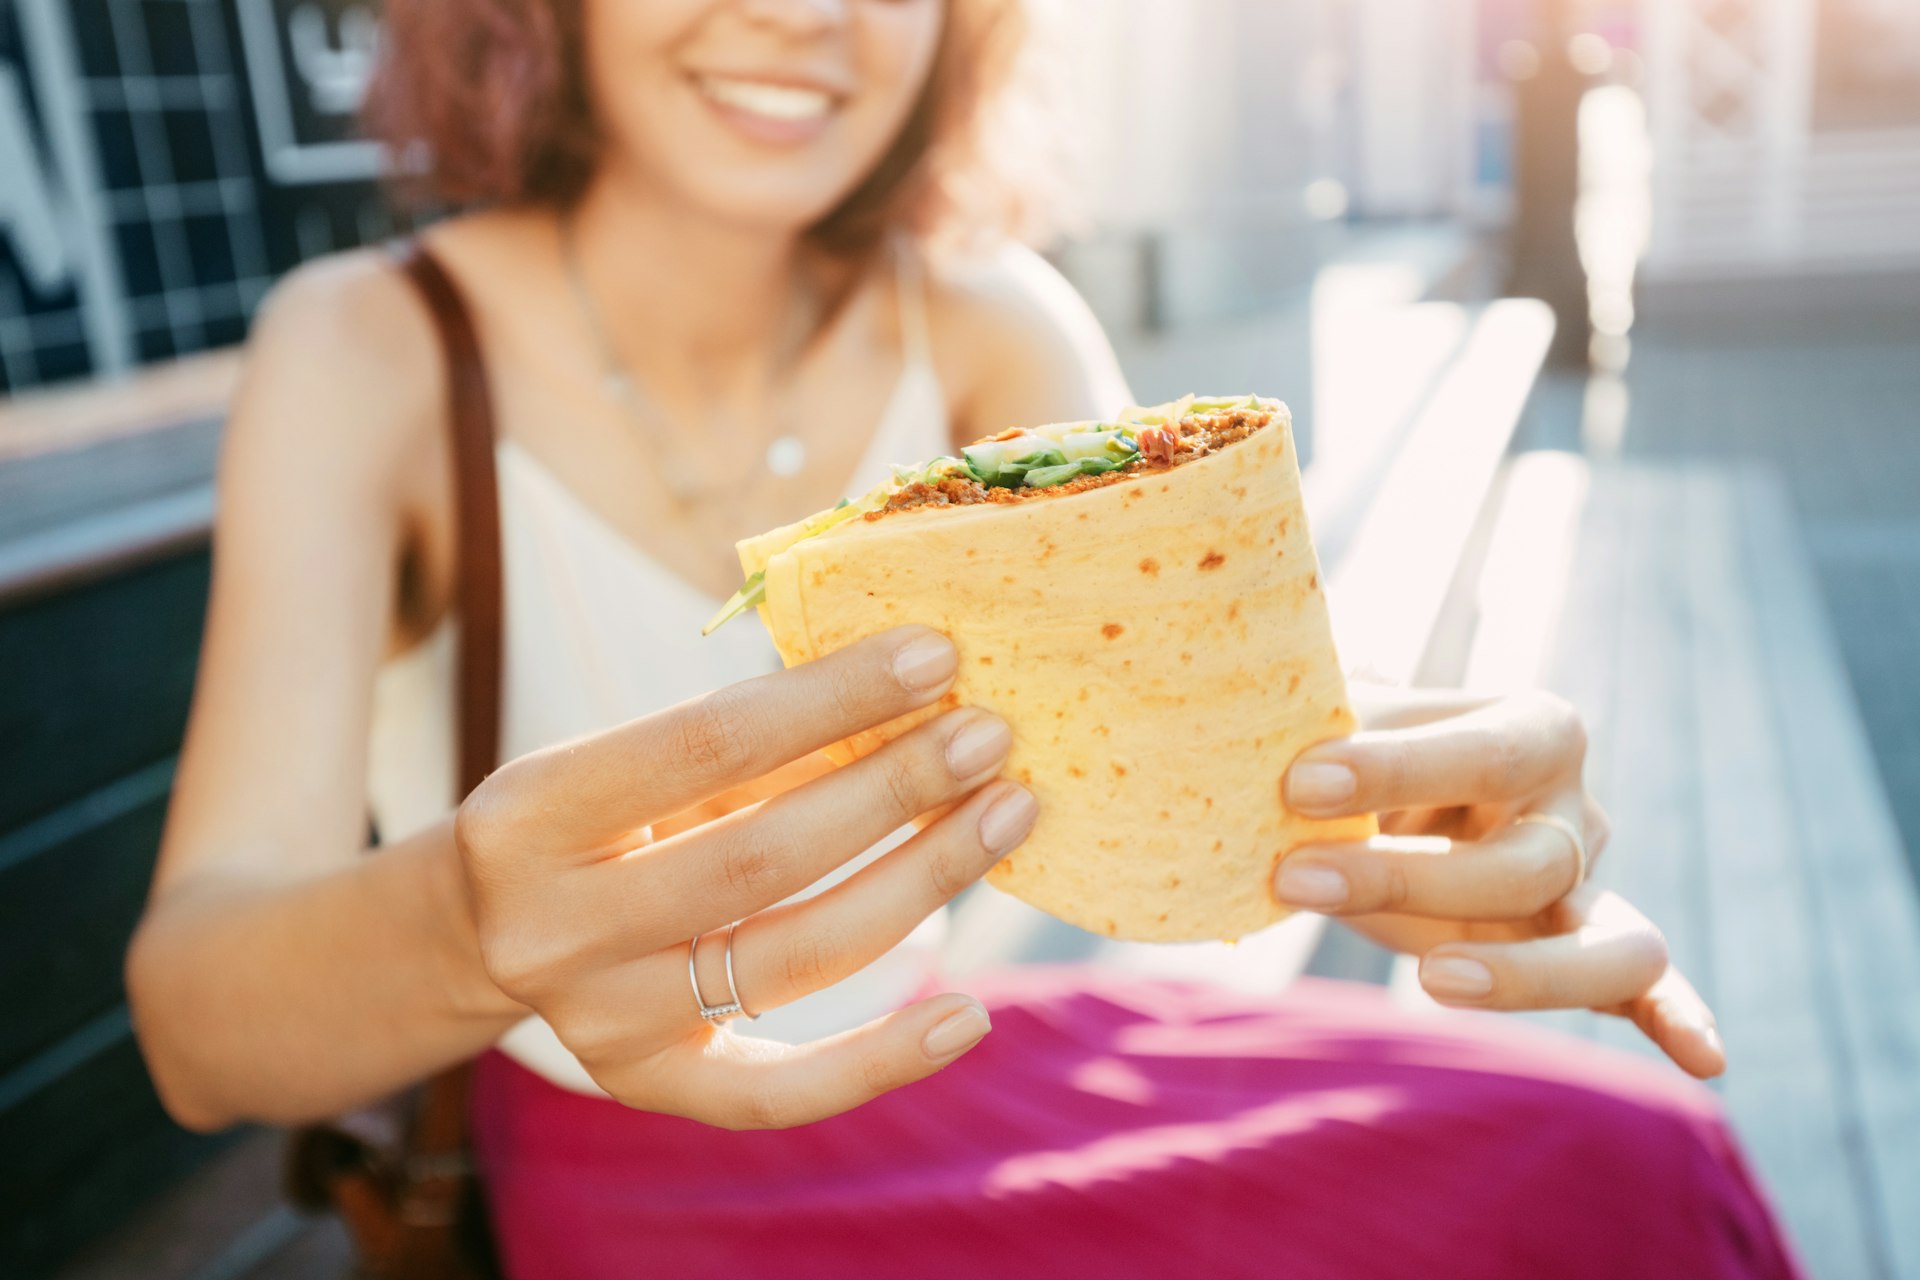 A woman holds out a Mexican quesadilla towards the camera - a folded bread stuffed with fillings